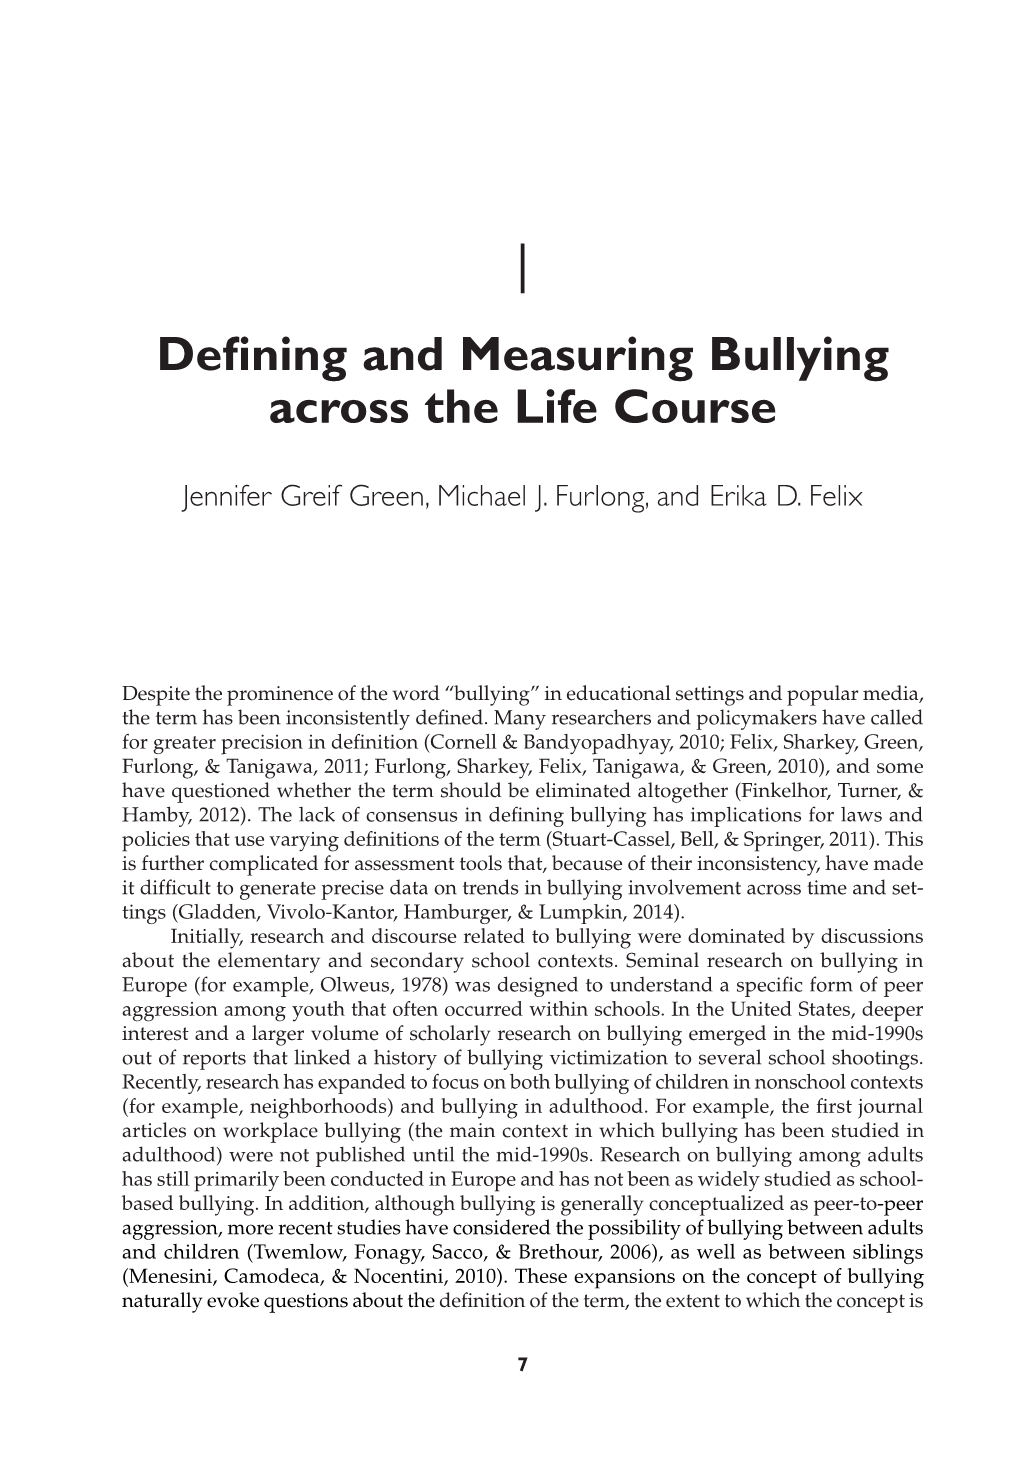 Defining and Measuring Bullying Across the Life Course